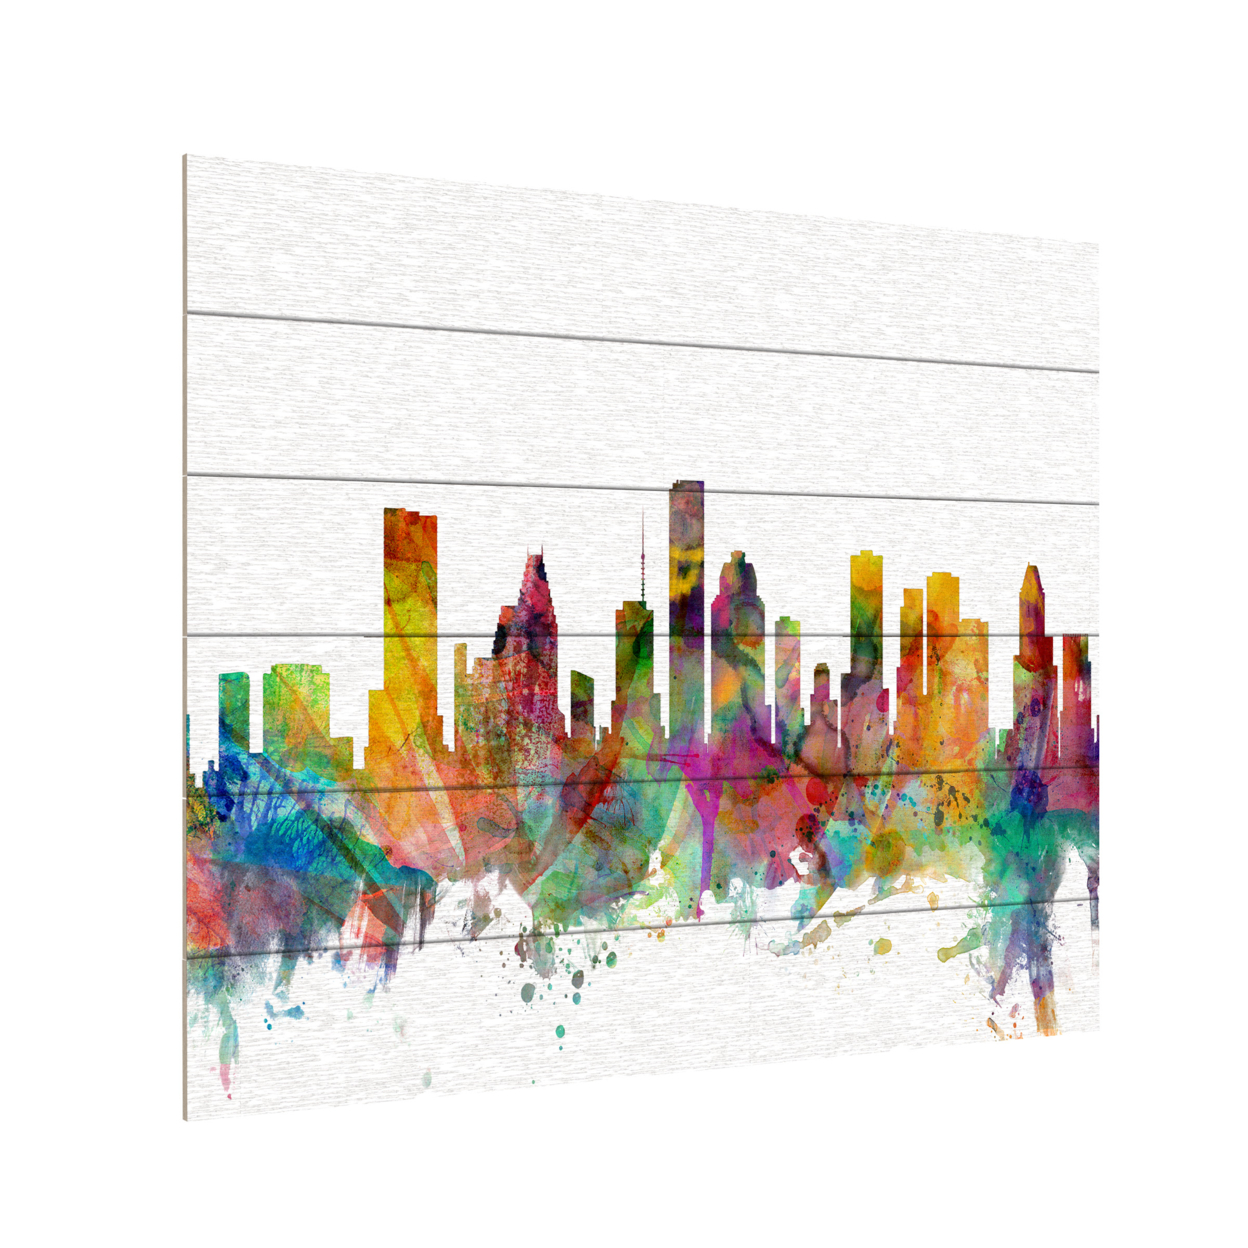 Wooden Slat Art 18 X 22 Inches Titled Houston Texas Skyline Ready To Hang Home Decor Picture